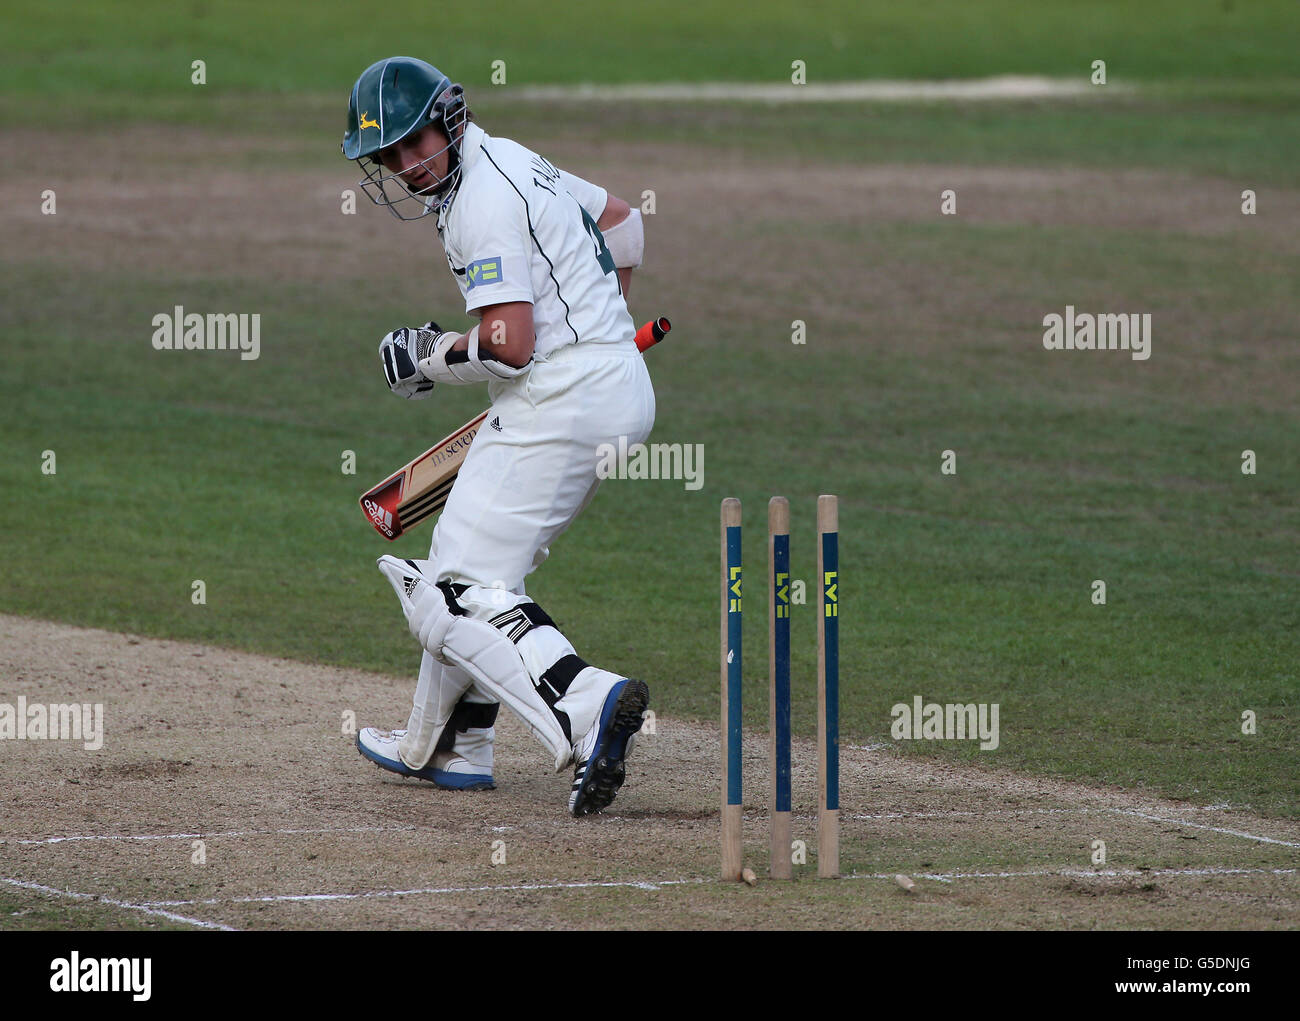 Nottinghamshire batsman James Taylor looks back to find he has stepped on his own wicket during the LV County Championship match at Edgbaston, Birmingham. Stock Photo